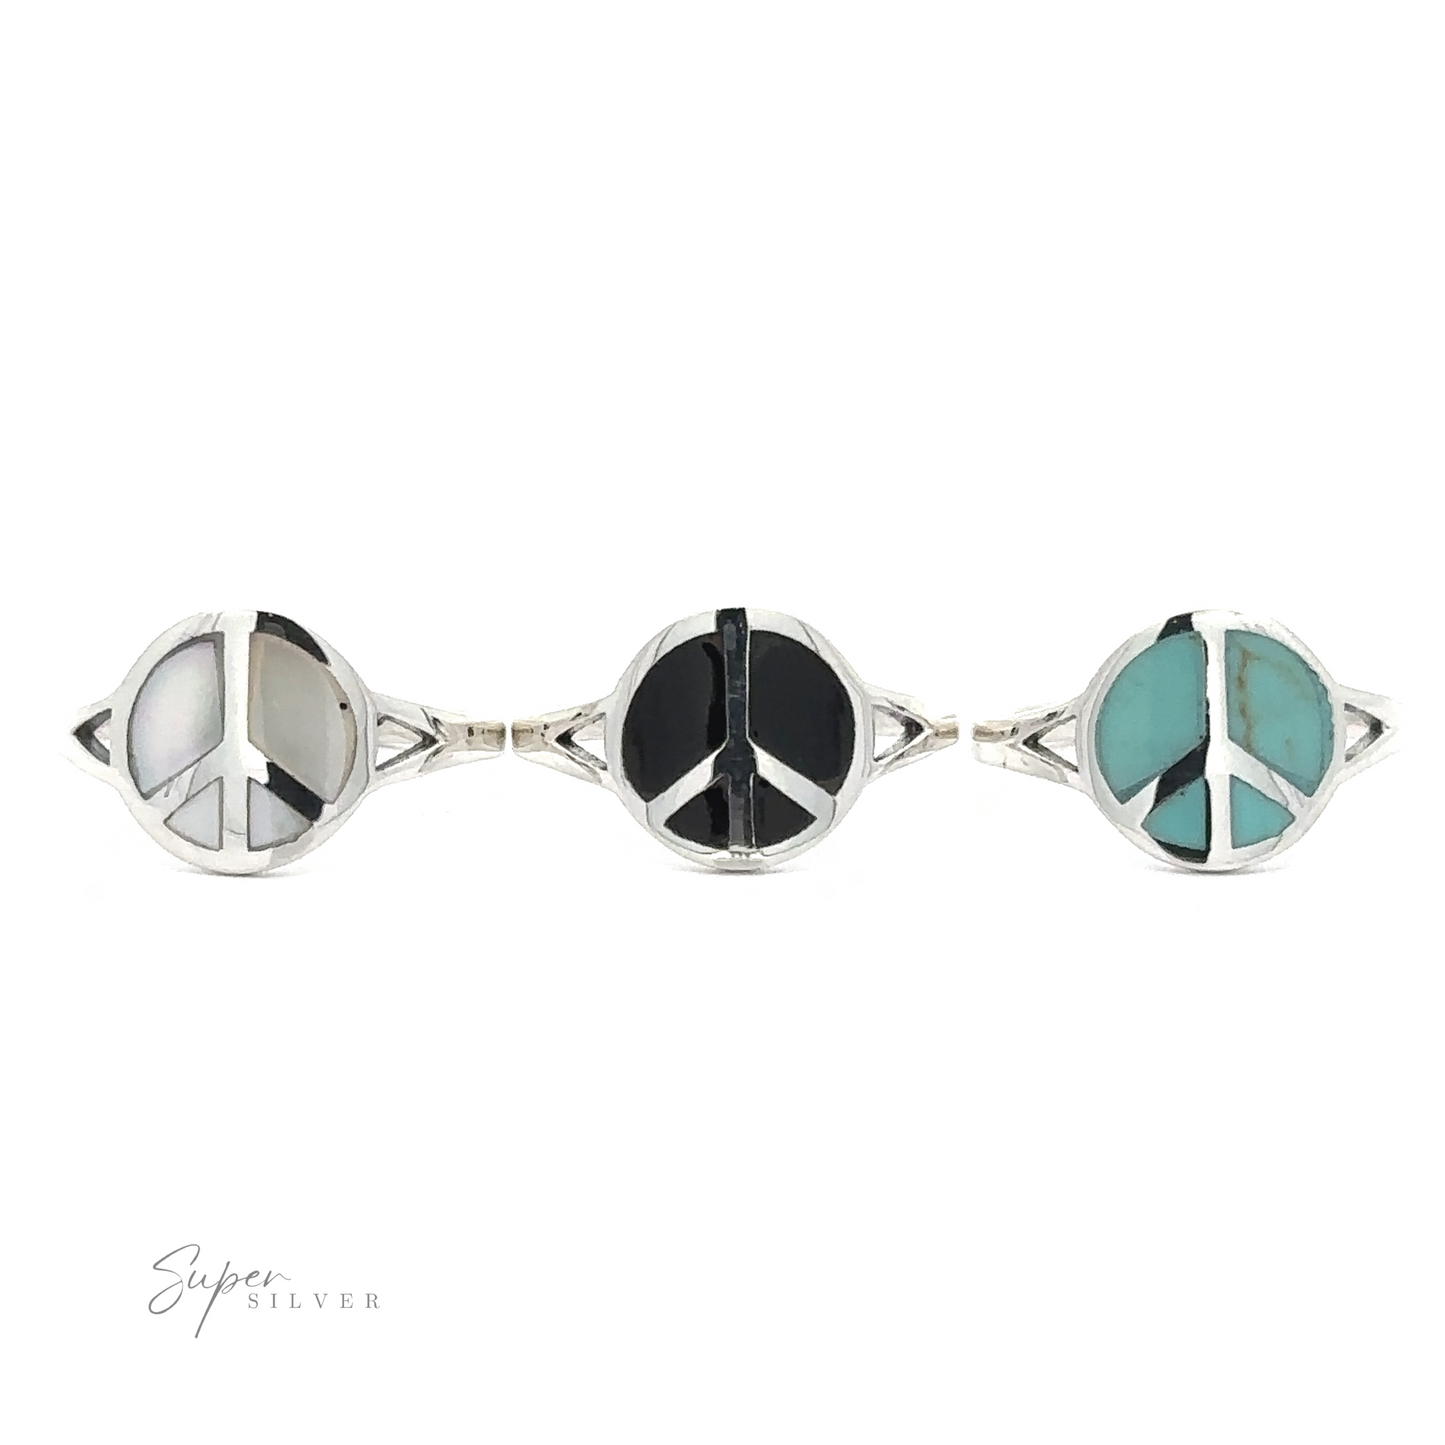 Three silver rings, each showcasing a Stone Inlay Peace Sign Ring with inlays of white, onyx, and turquoise. The background is white with a logo "Super Silver" on the bottom left.